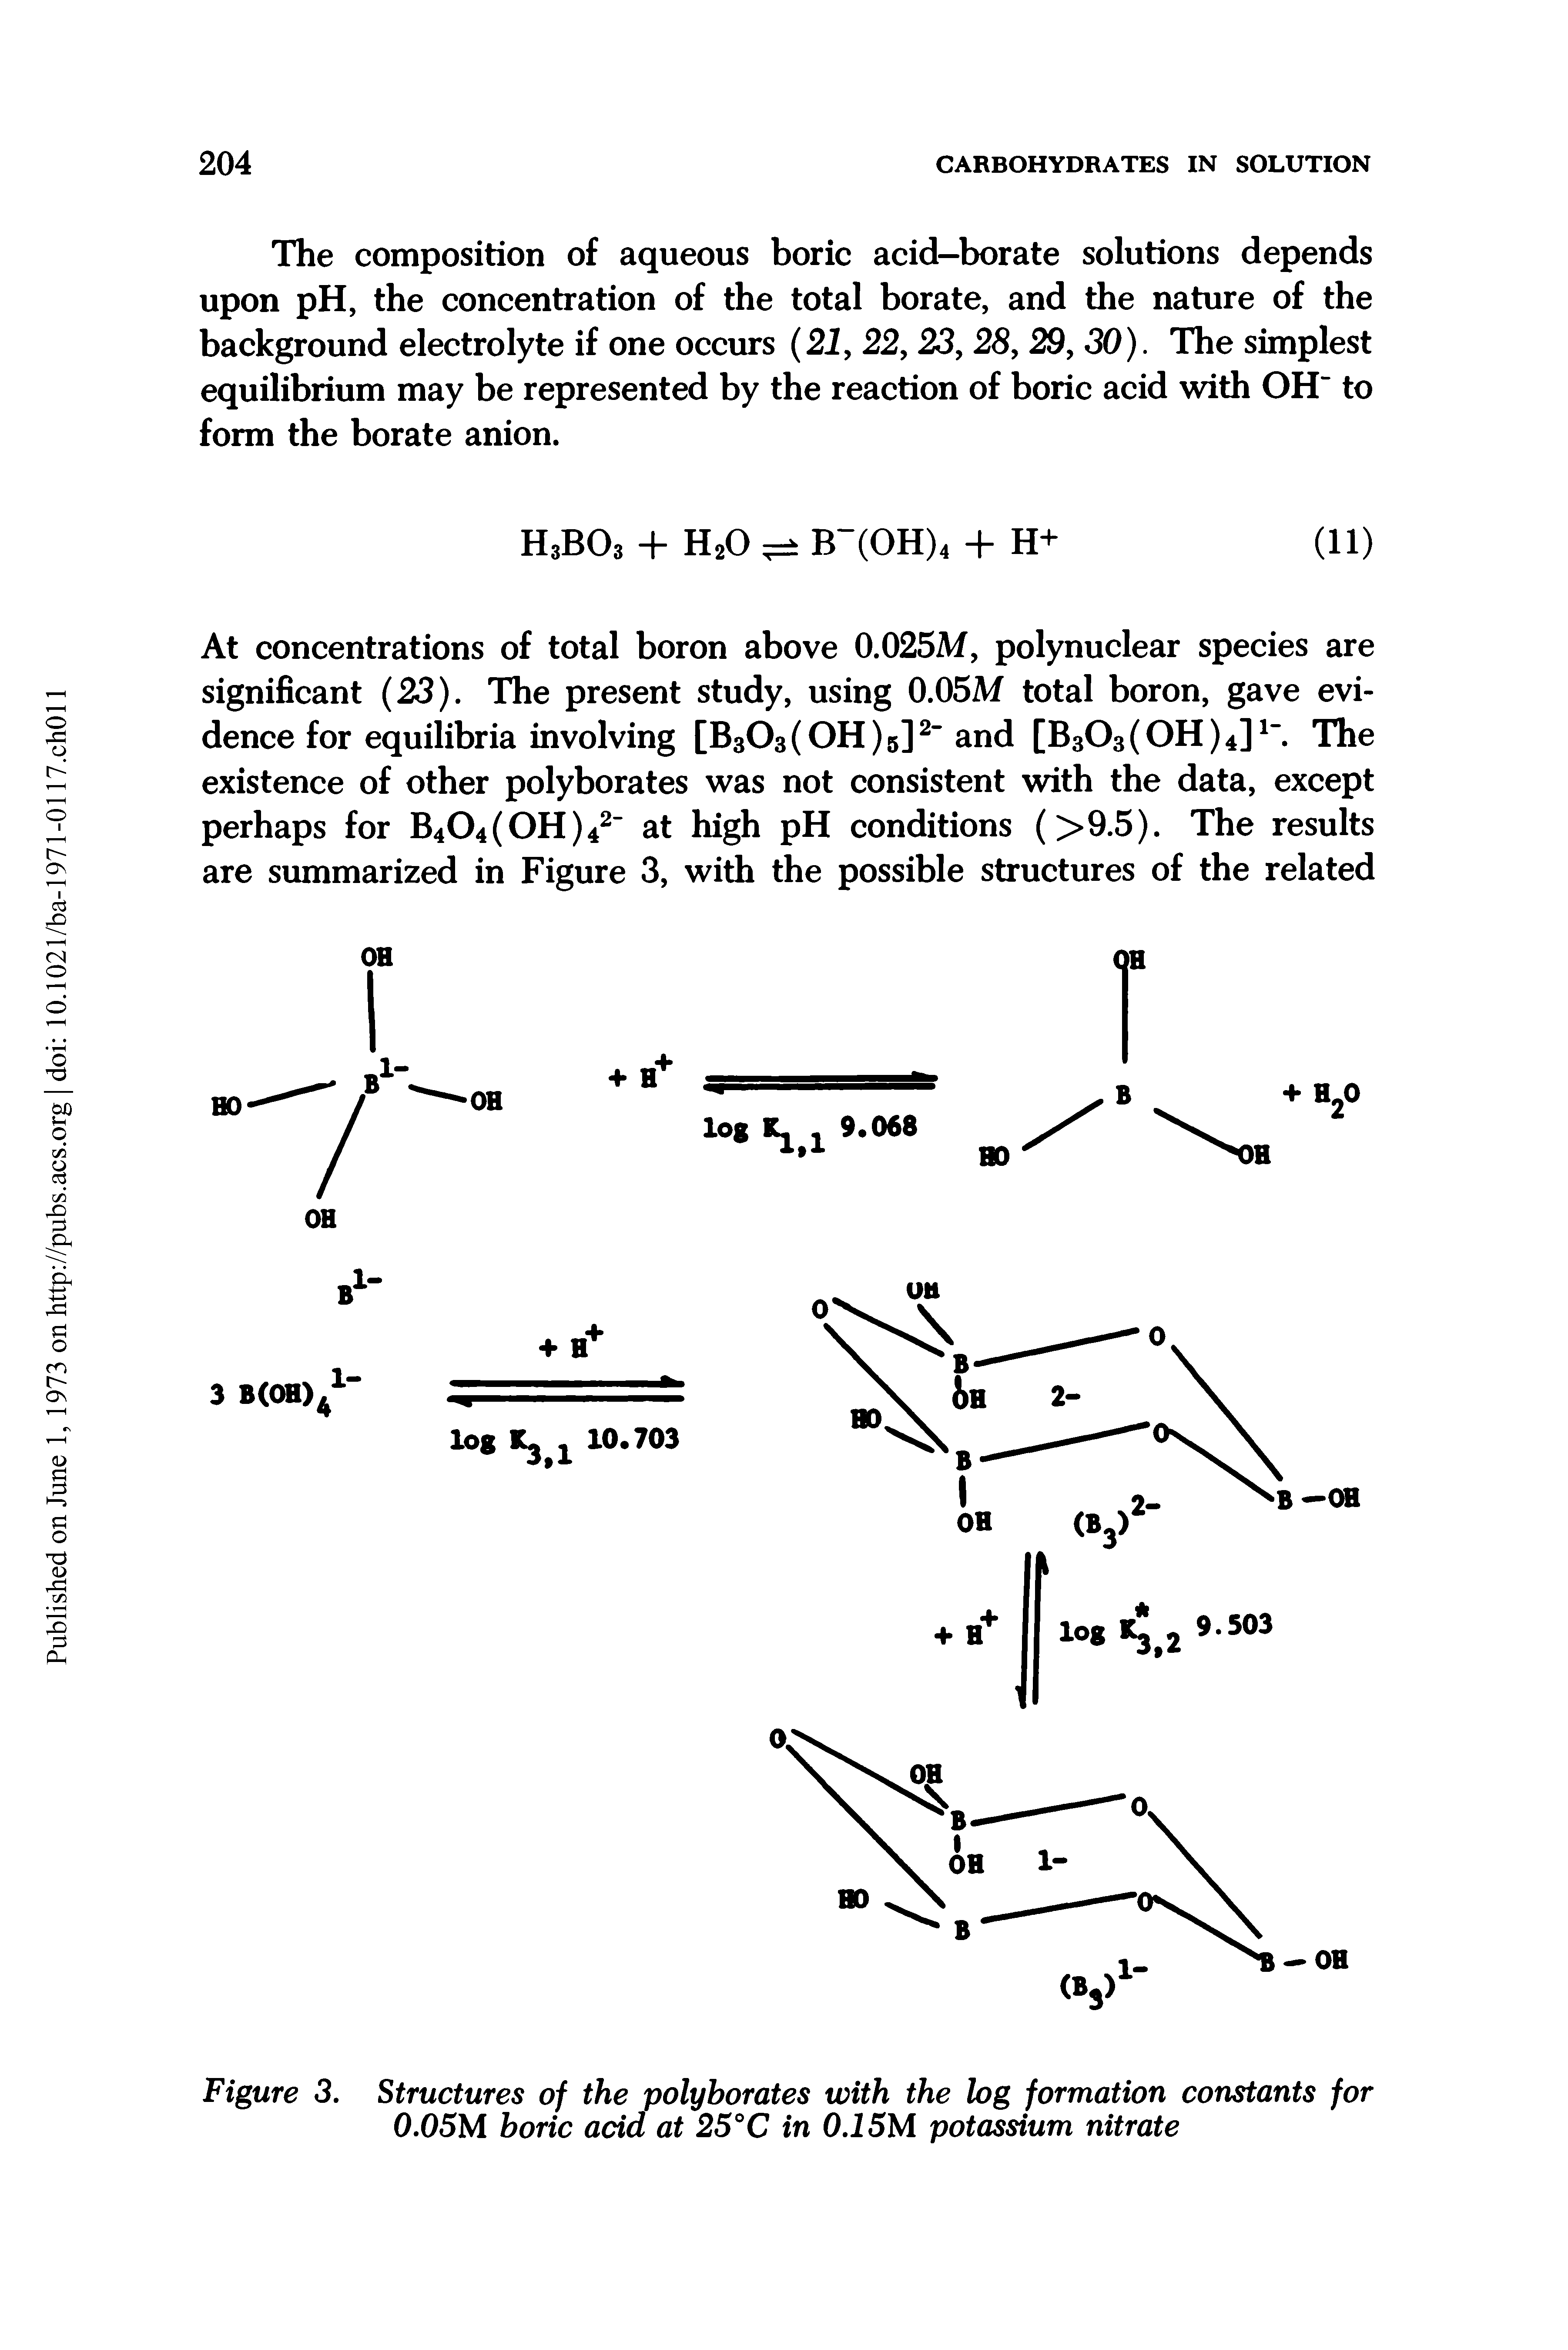 Figure 3. Structures of the polyhorates with the log formation constants for 0.05M boric acid at 25°C in 0.15M potassium nitrate...